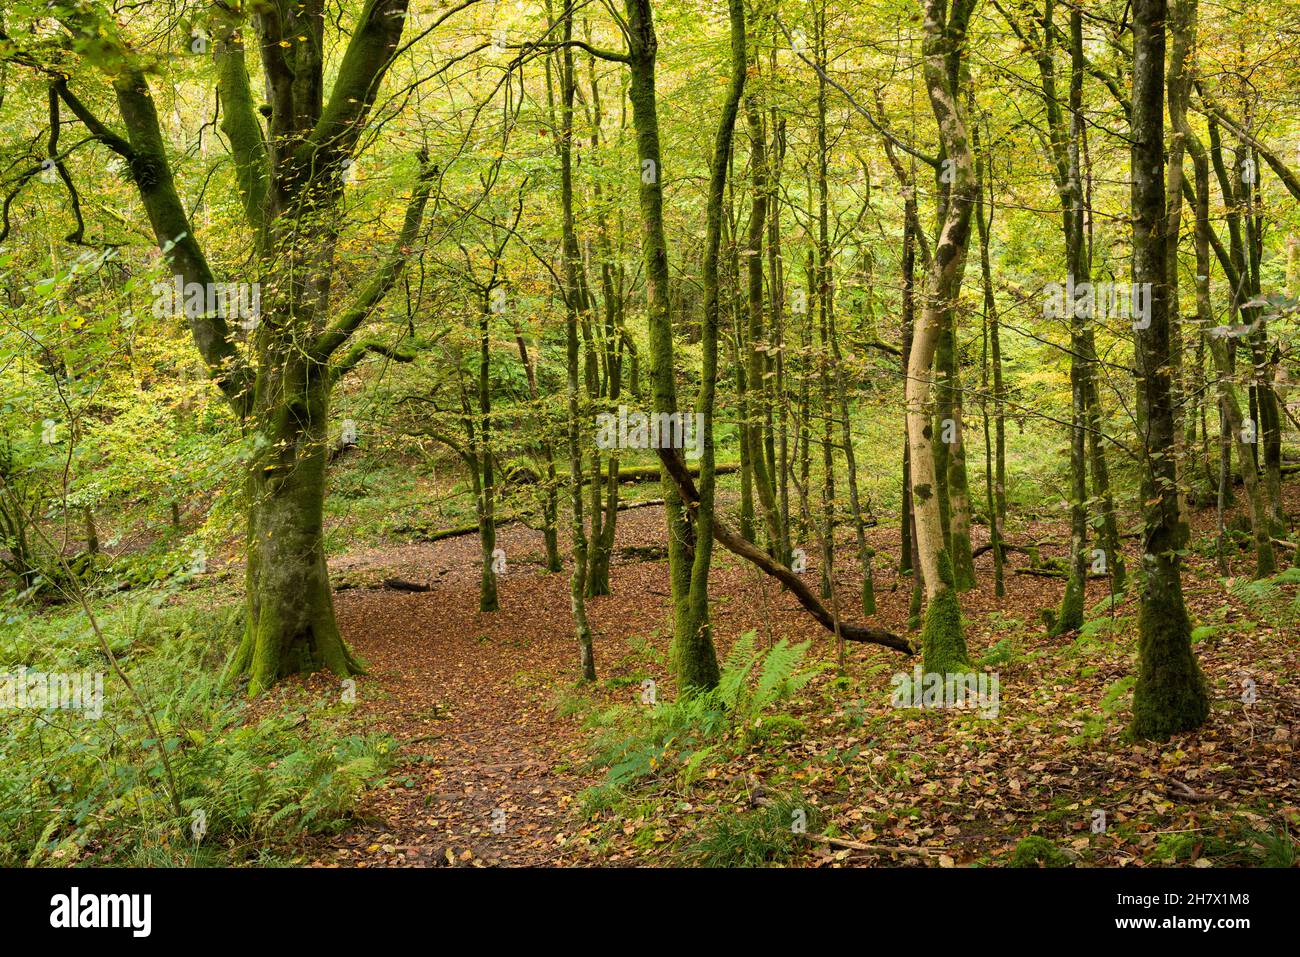 Long Wood in autumn in the Mendip Hills Area of Outstanding Natural Beauty near Cheddar, Somerset, England. Stock Photo